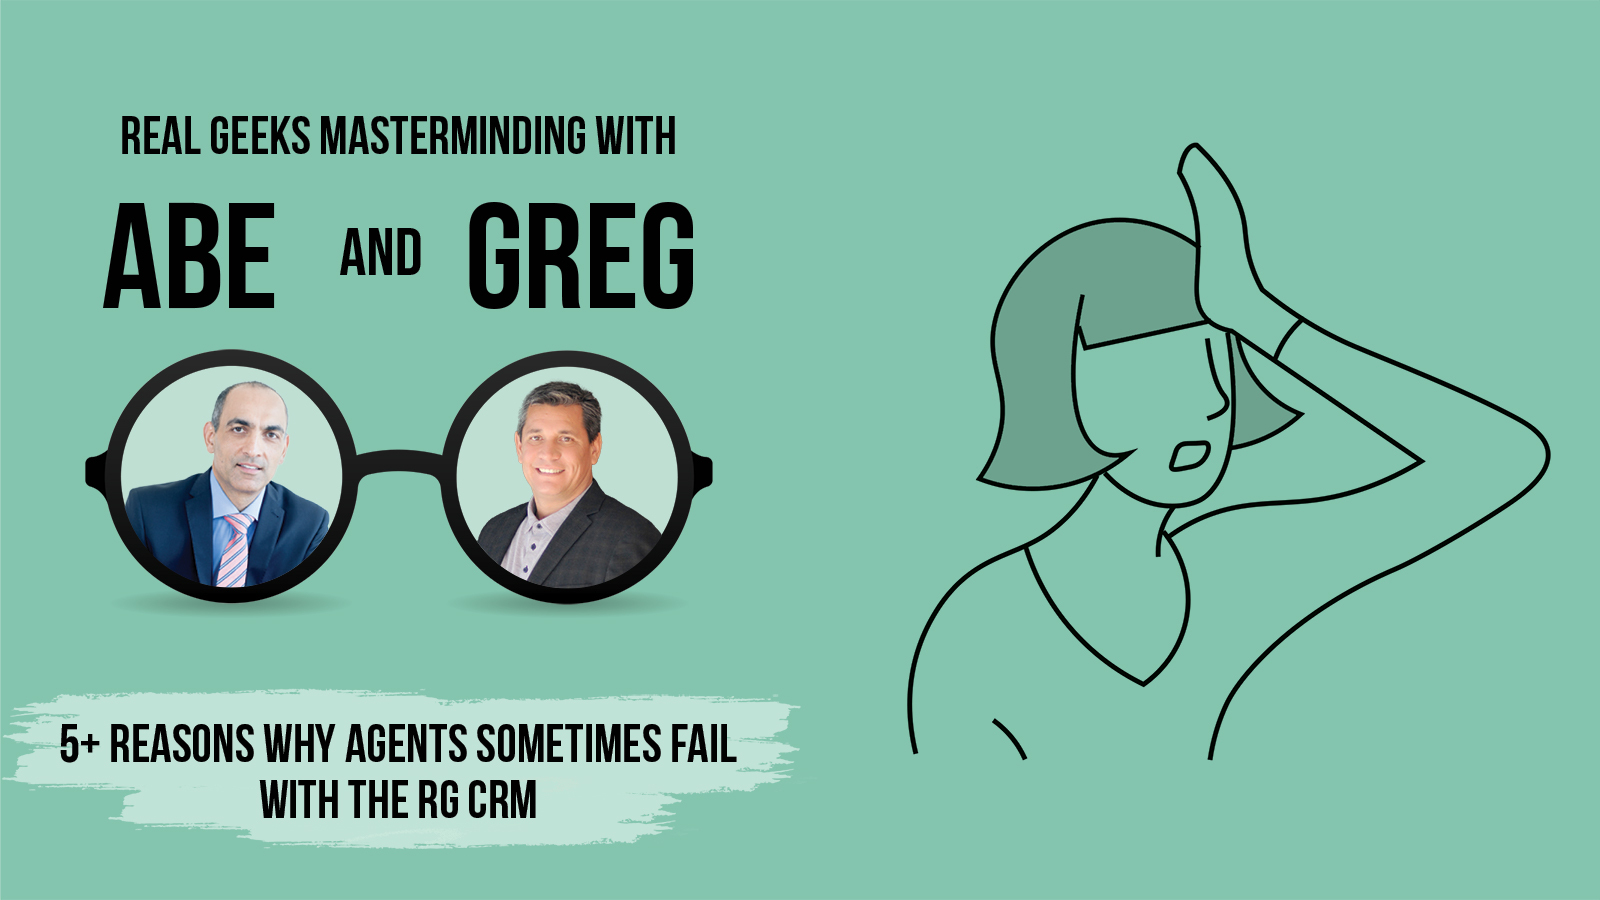 5+ reasons why agents sometimes fail with the RG CRM